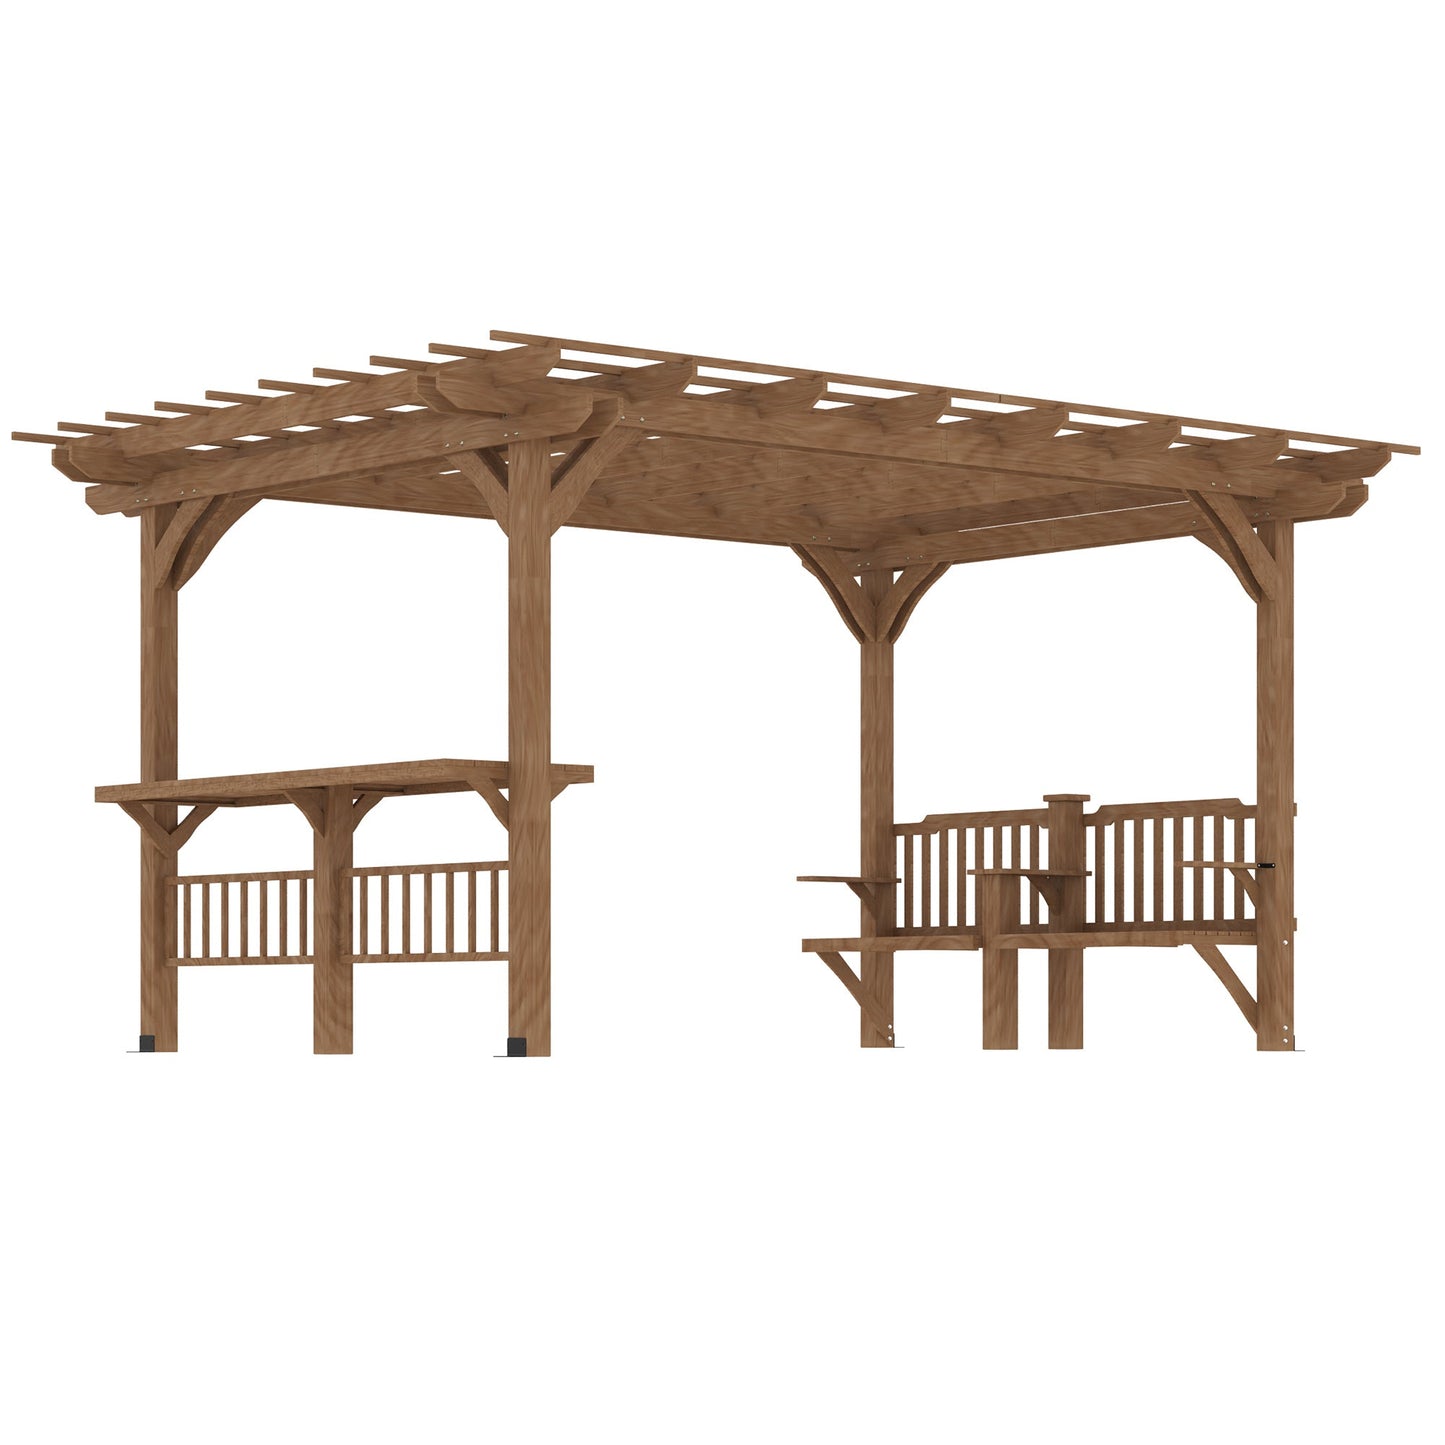 -Outsunny 14' x 10' Outdoor Pergola, Wooden Pergola Grill Canopy with Bar Counters and Seating Benches, forÂ Garden,Â Patio,Â Backyard, Deck - Outdoor Style Company